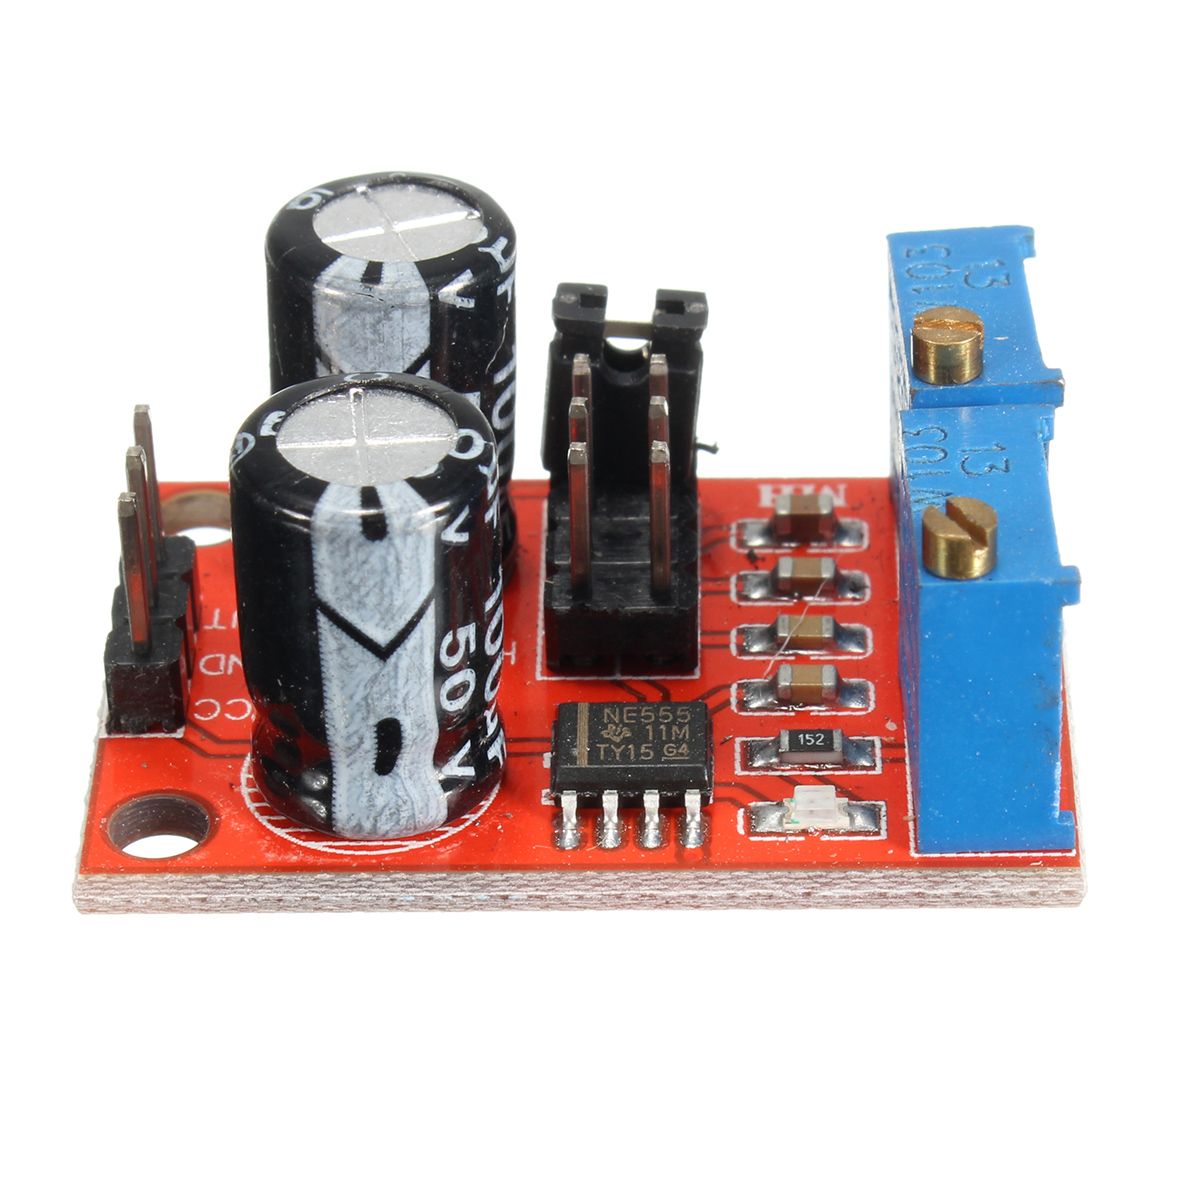 NE555-Pulse-Frequency-Duty-Cycle-Adjustable-Module-Square-Wave-Signal-Generator-1066251